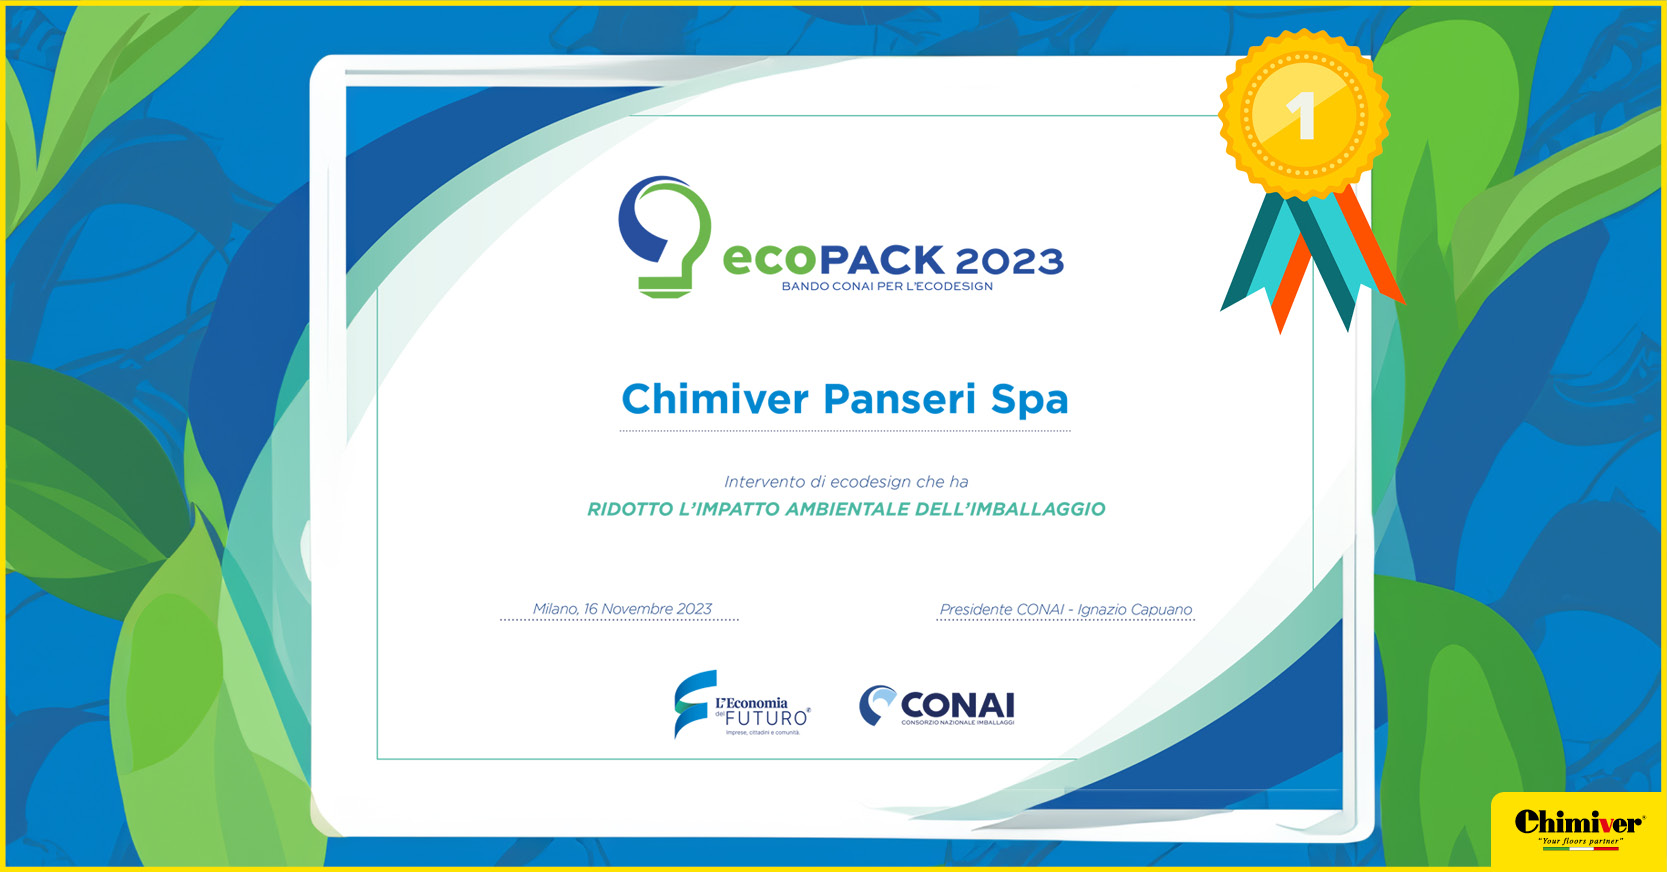 Chimiver is among the winners of the CONAI Eco-Desing award!